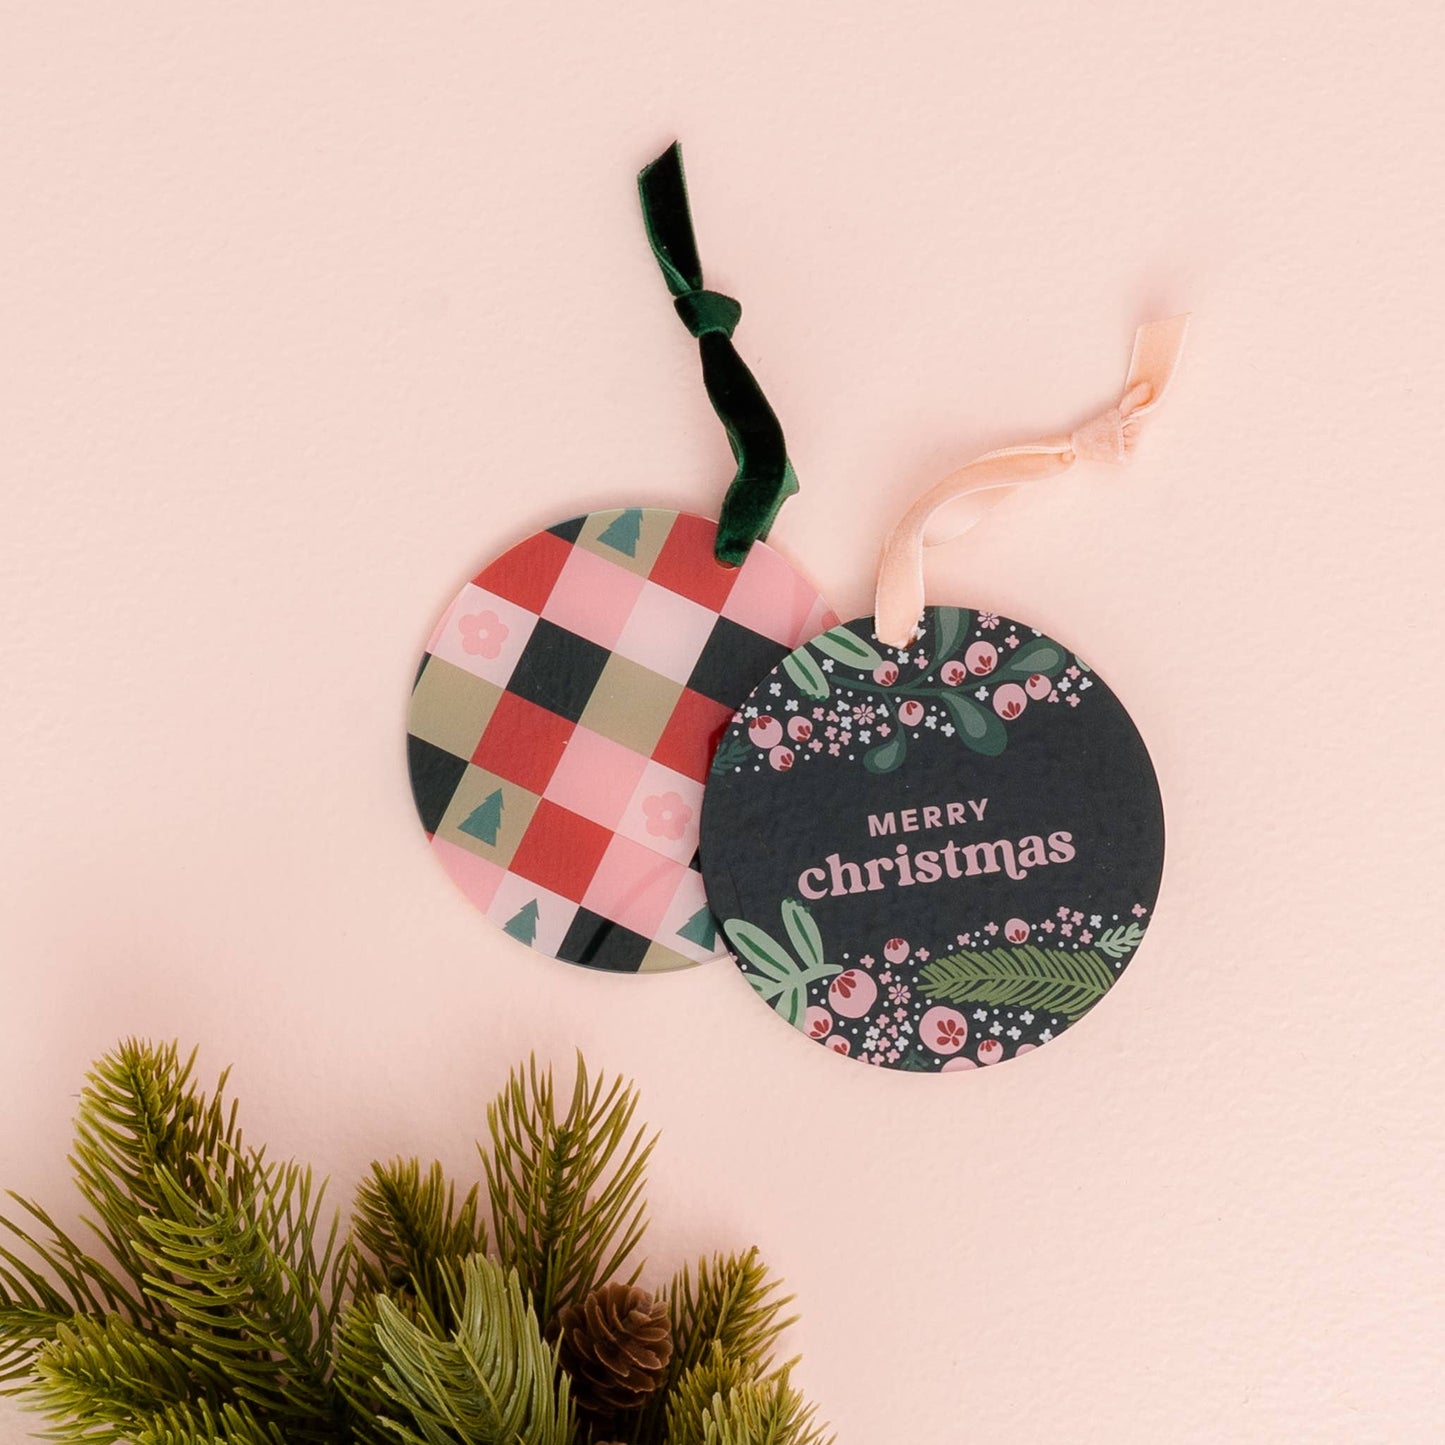 Holiday Ornament - Merry Christmas